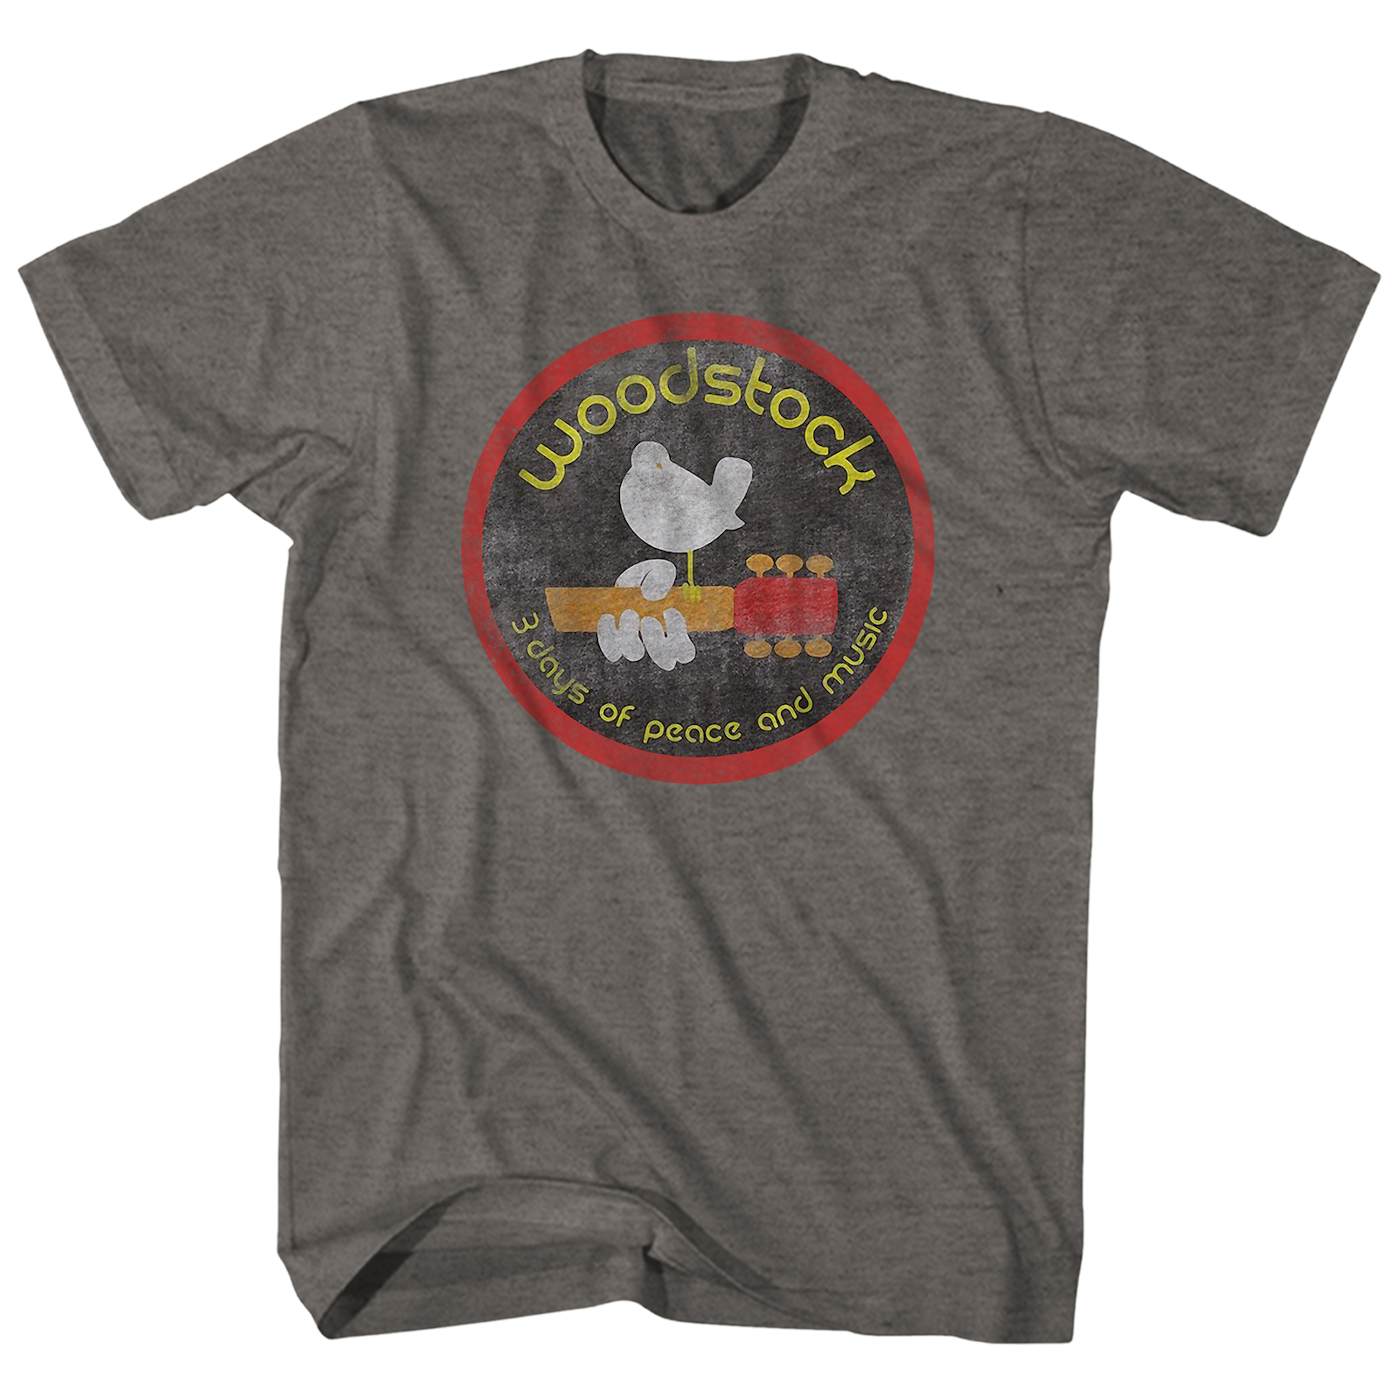 Woodstock T-Shirt | 3 Days Of Peace And Music Heather Woodstock Shirt